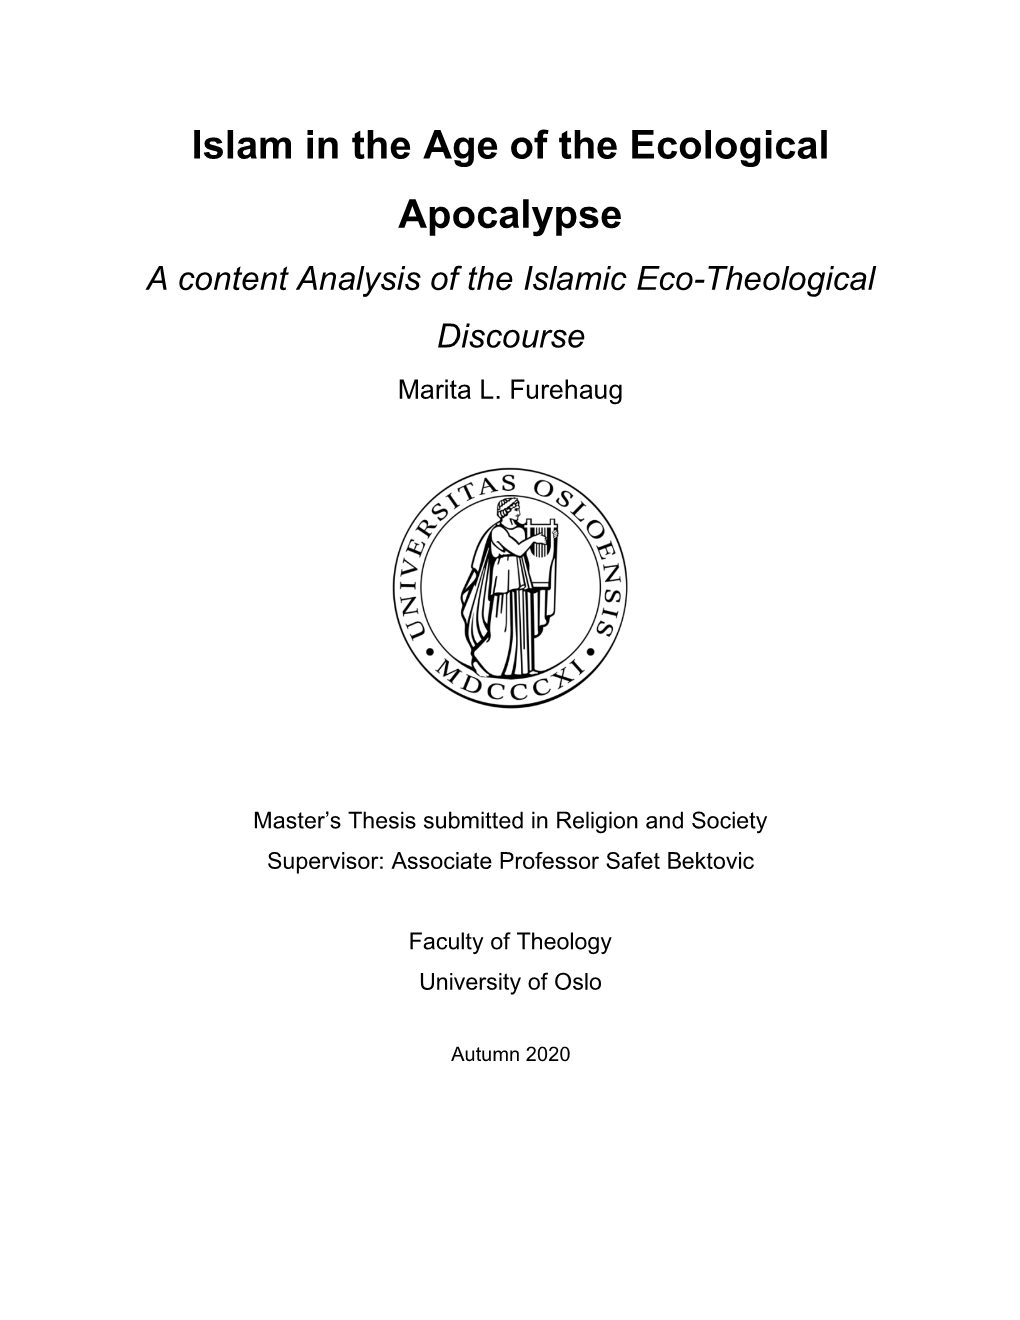 Islam in the Age of the Ecological Apocalypse a Content Analysis of the Islamic Eco-Theological Discourse Marita L